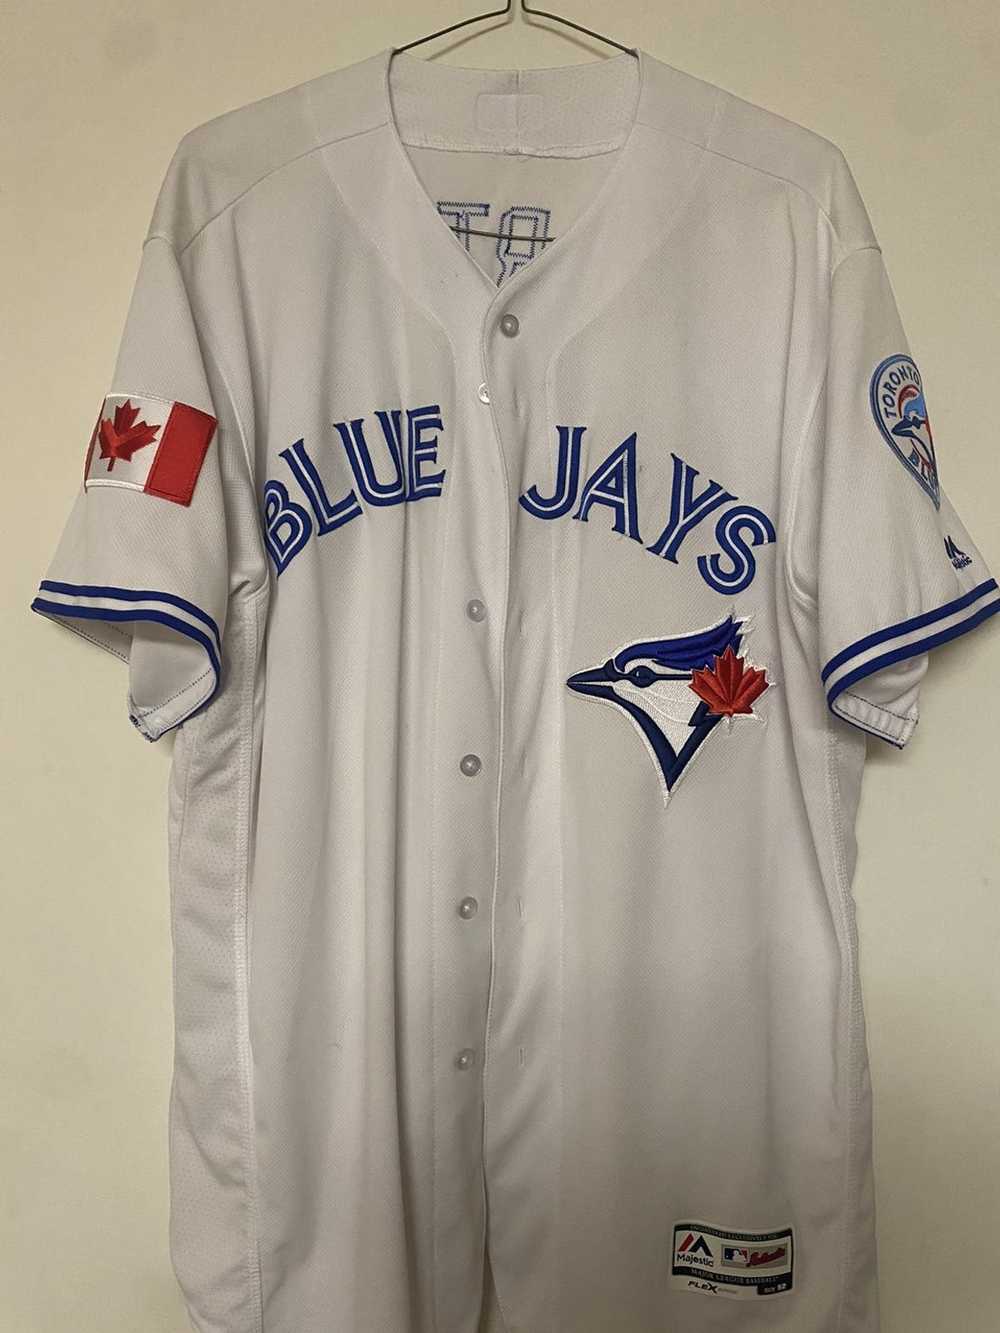 Tops, Mlb Blue Jays Youth Large 1416 Jersey Used Once